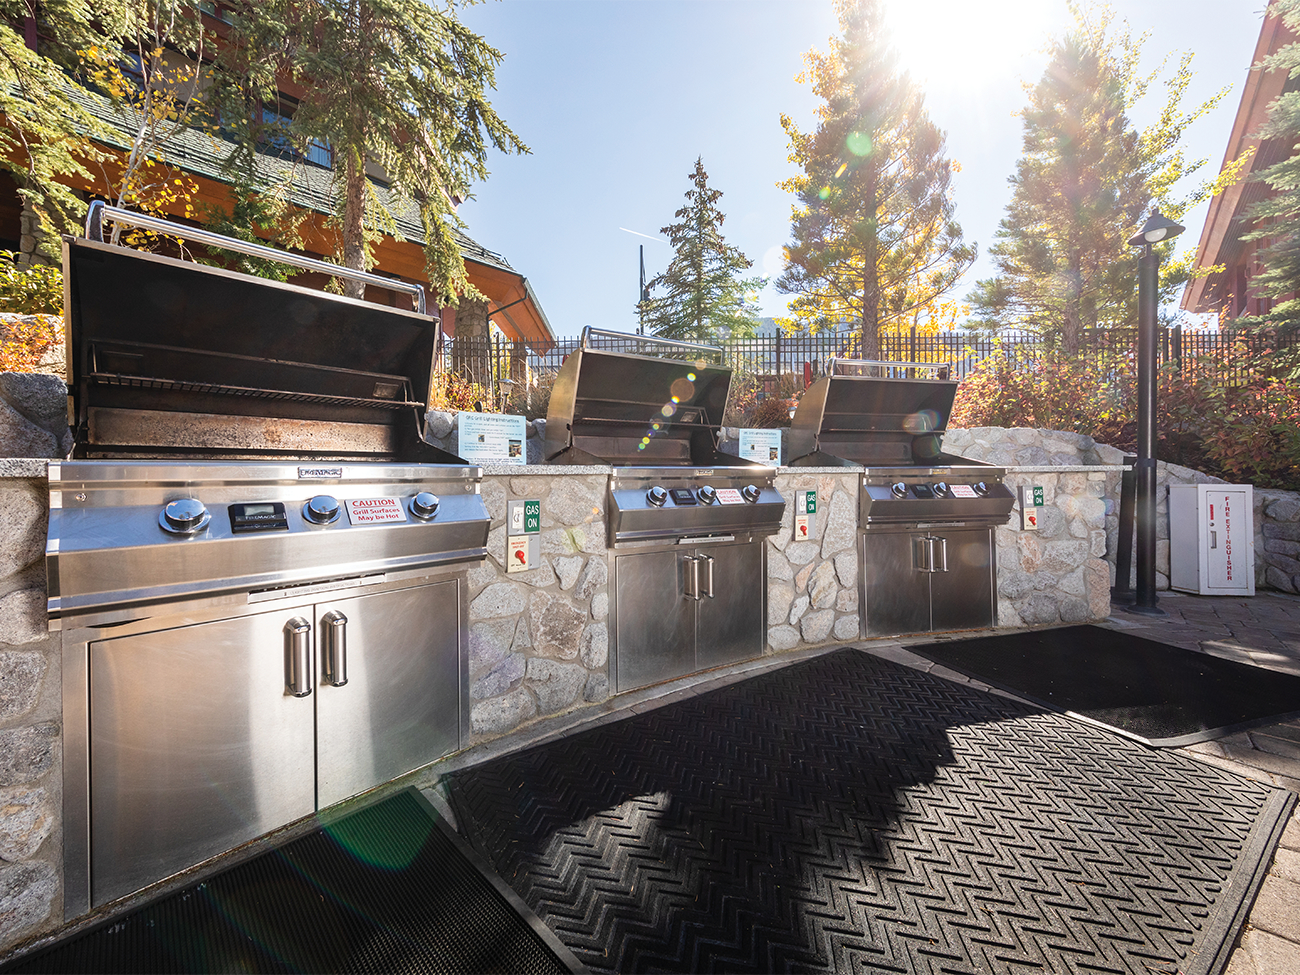 Marriott's Grand Residence Club<span class='trademark'>®</span> 1, Lake Tahoe Grills. Marriott's Grand Residence Club<span class='trademark'>®</span> 1, Lake Tahoe is located in South Lake Tahoe, California United States.